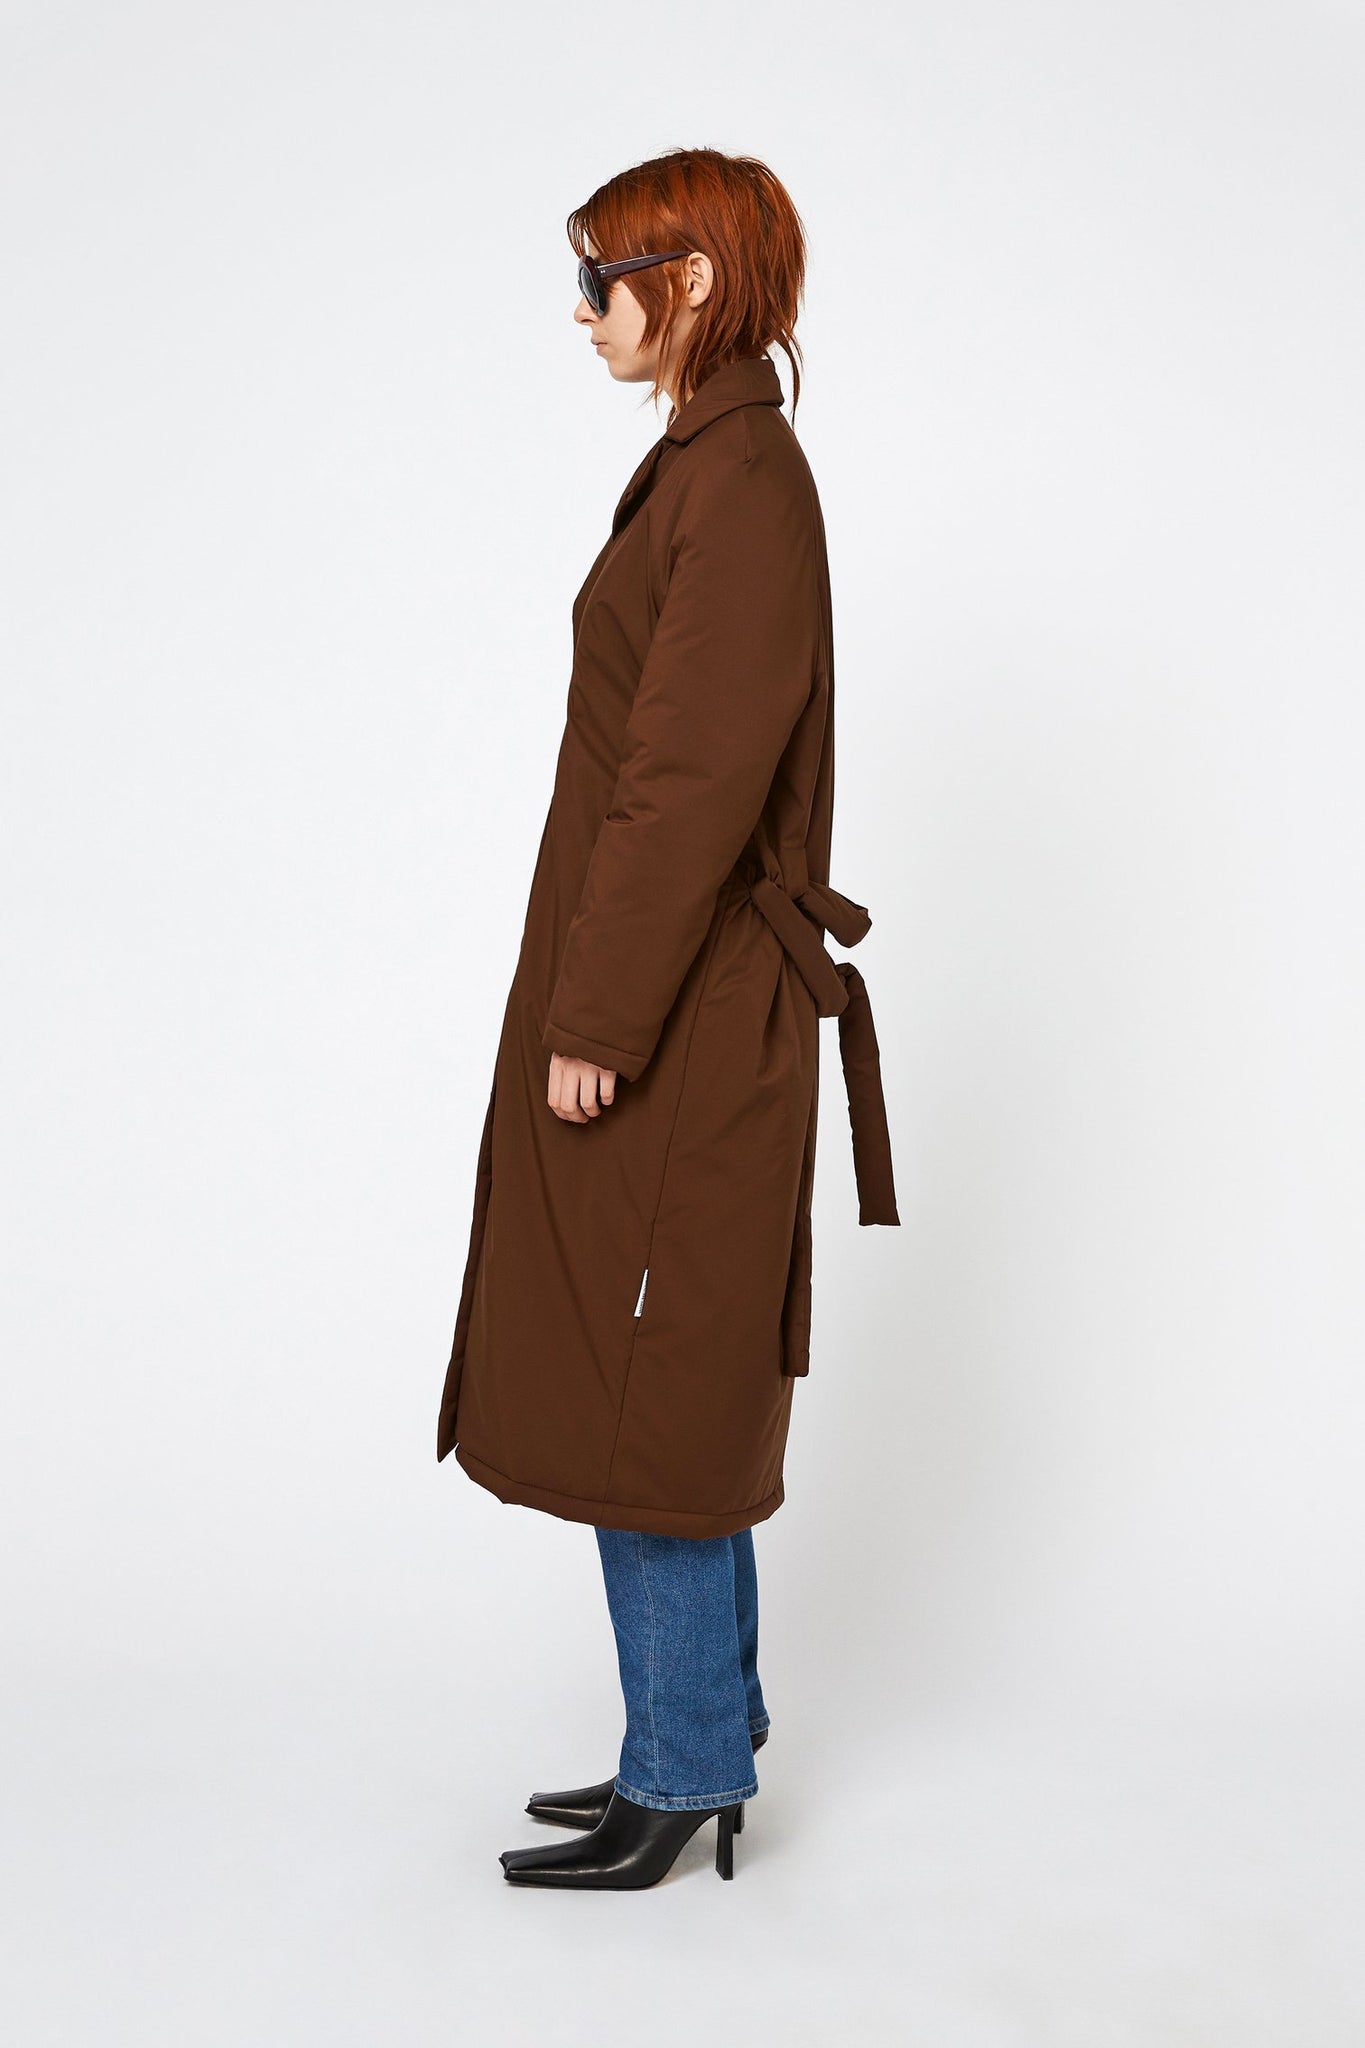 Esther coat in toffee by Won Hundred